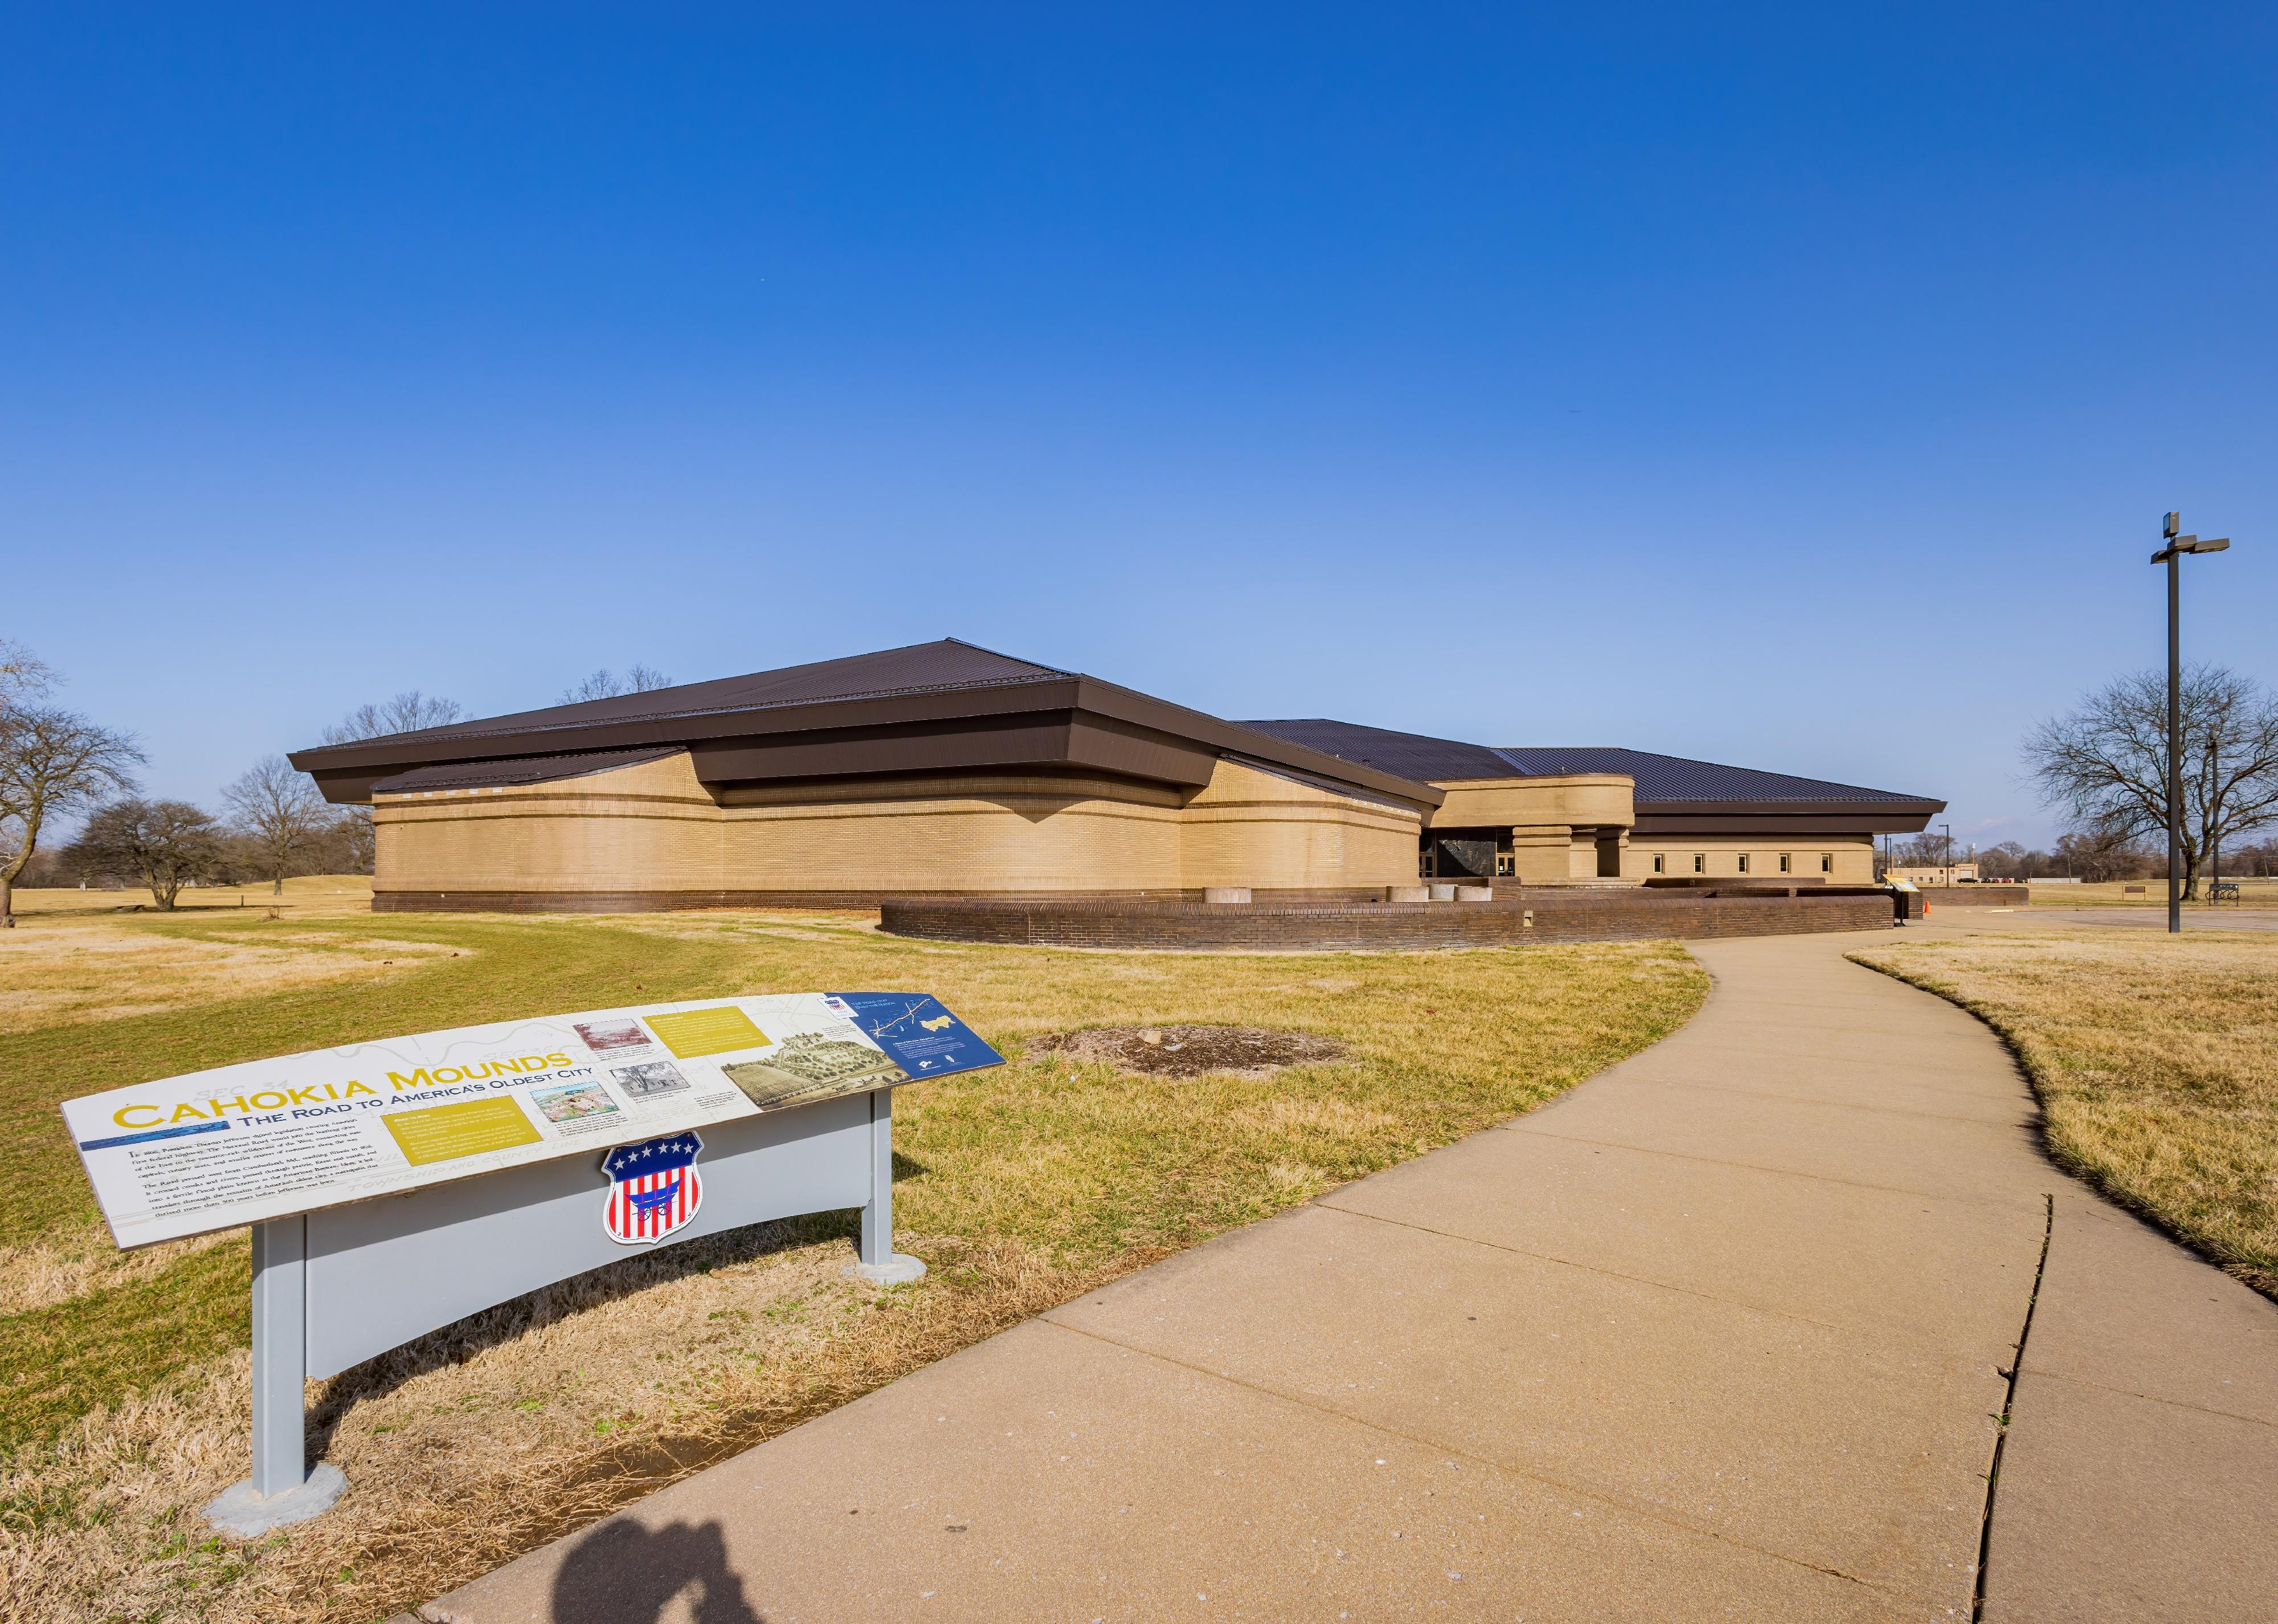 Sunny view of the Cahokia Mounds Museum Society.